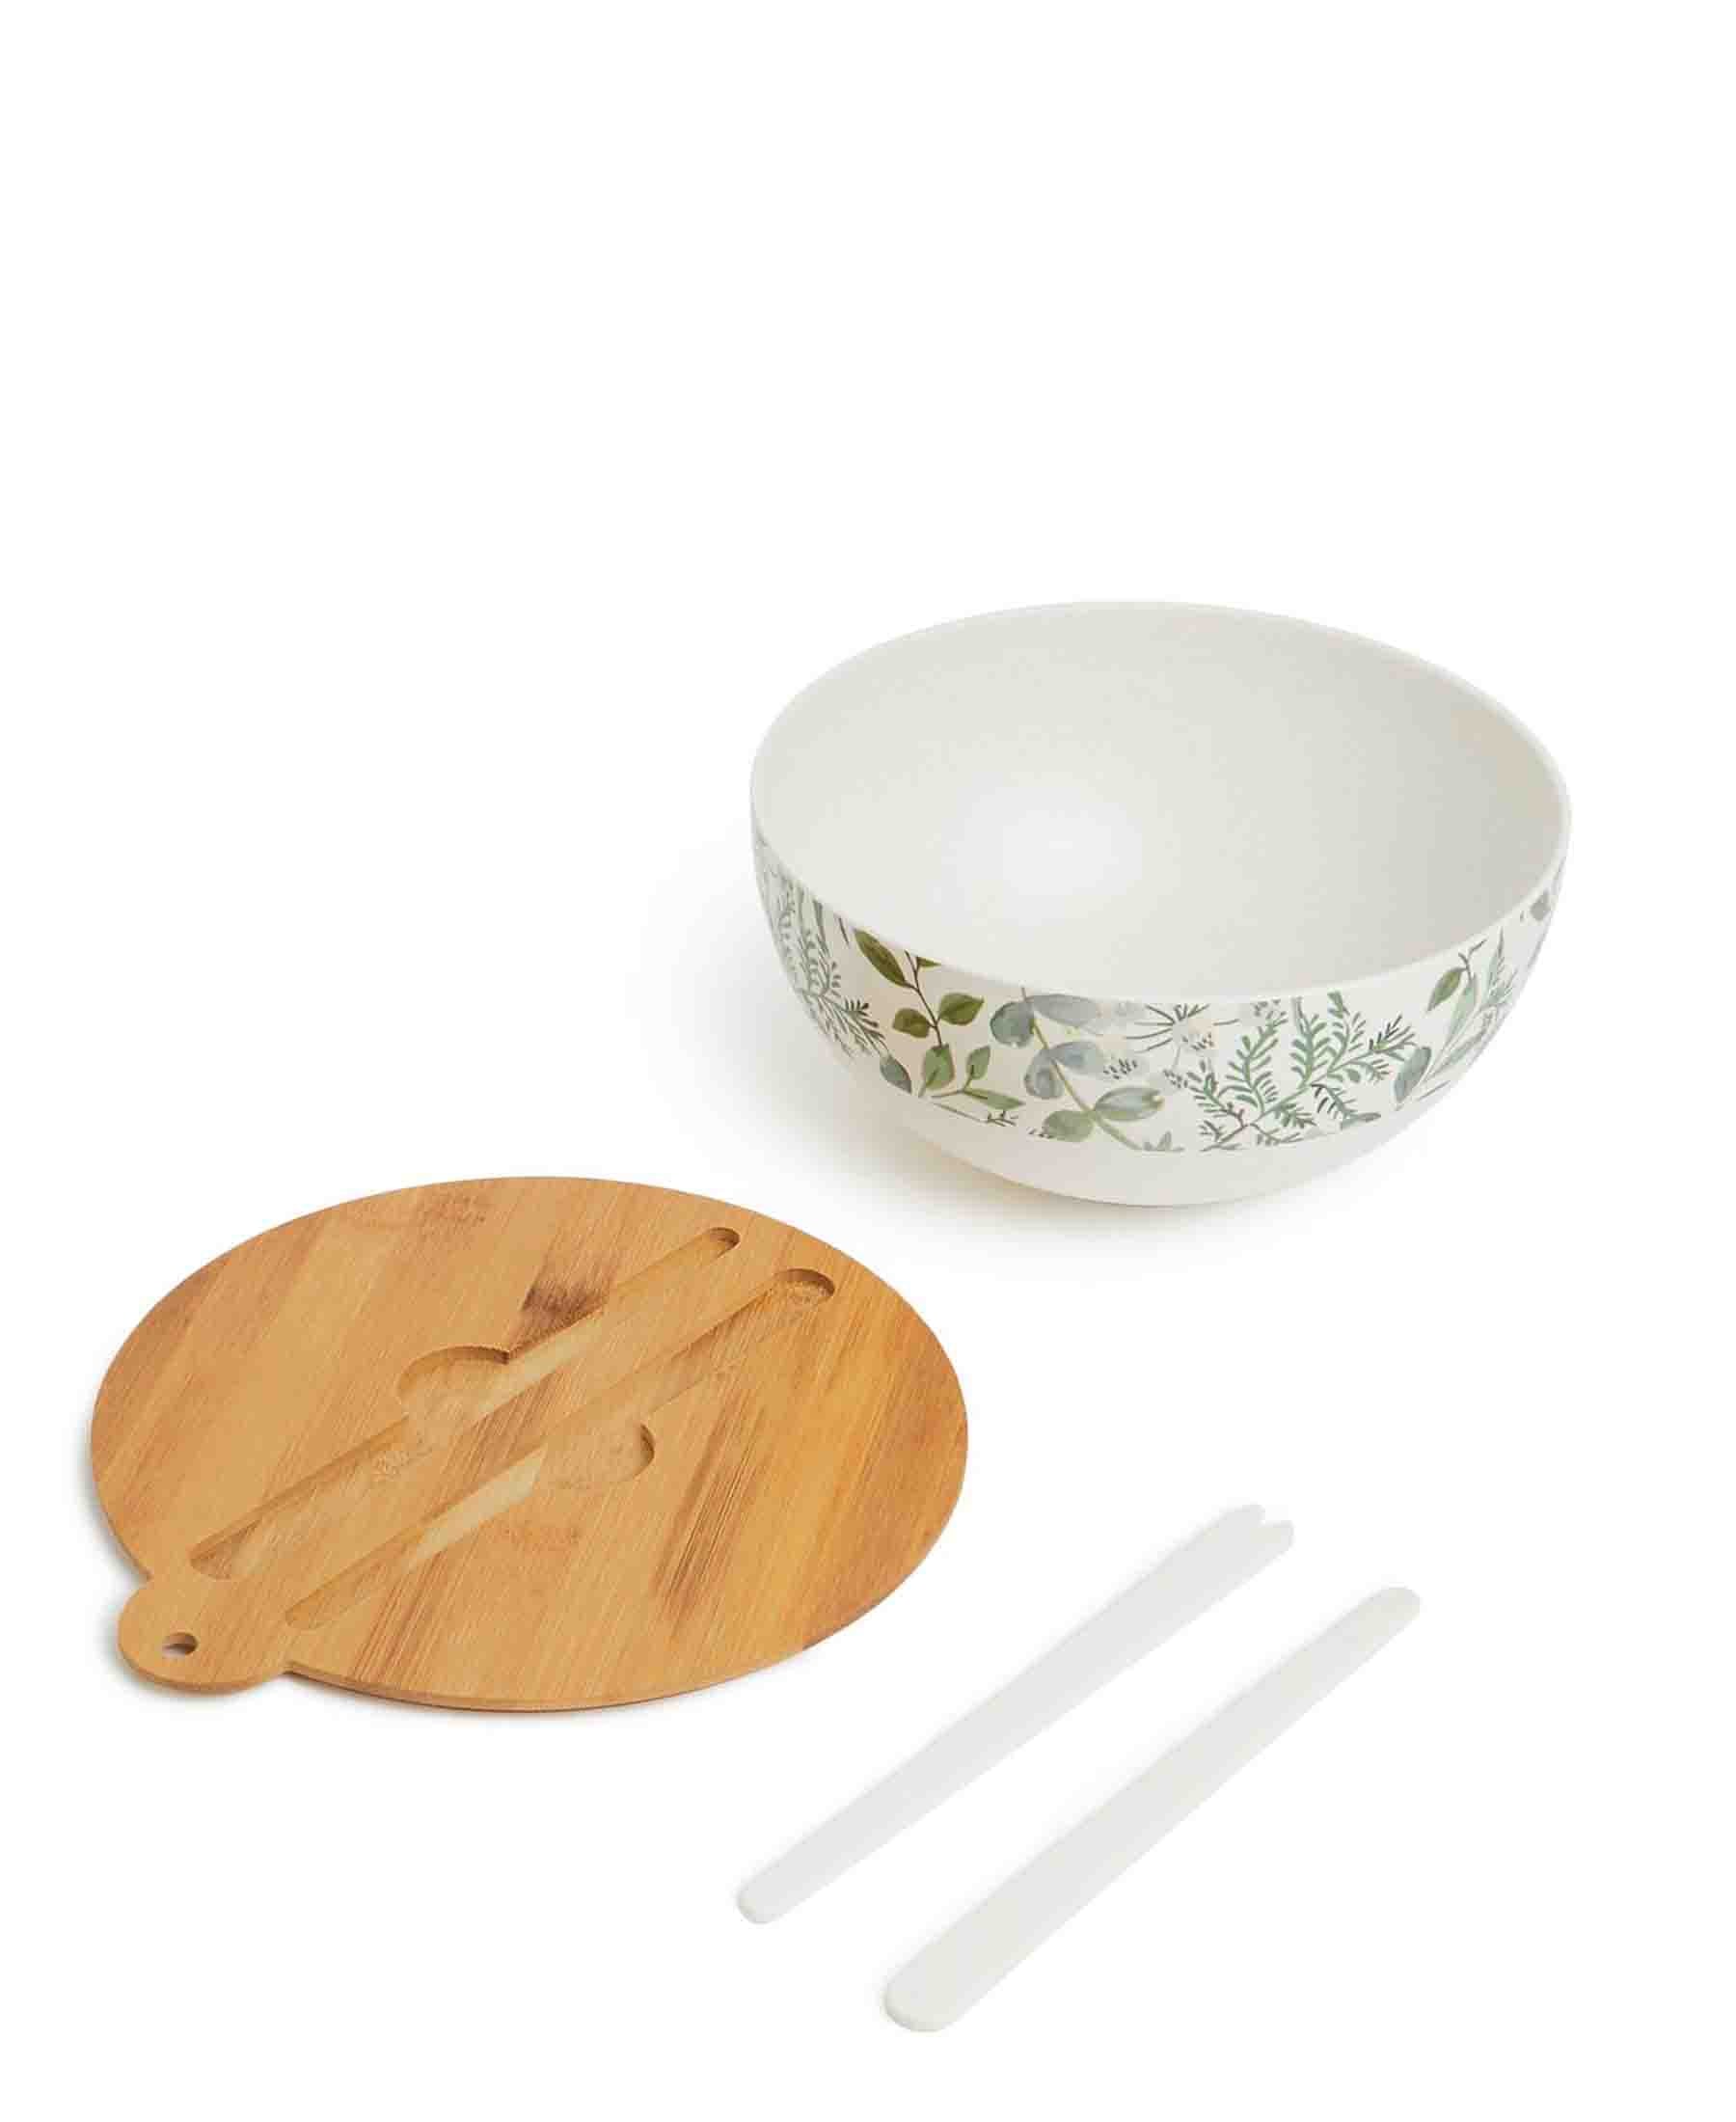 Bamboo Fibre Bowl with Lid & Cutlery